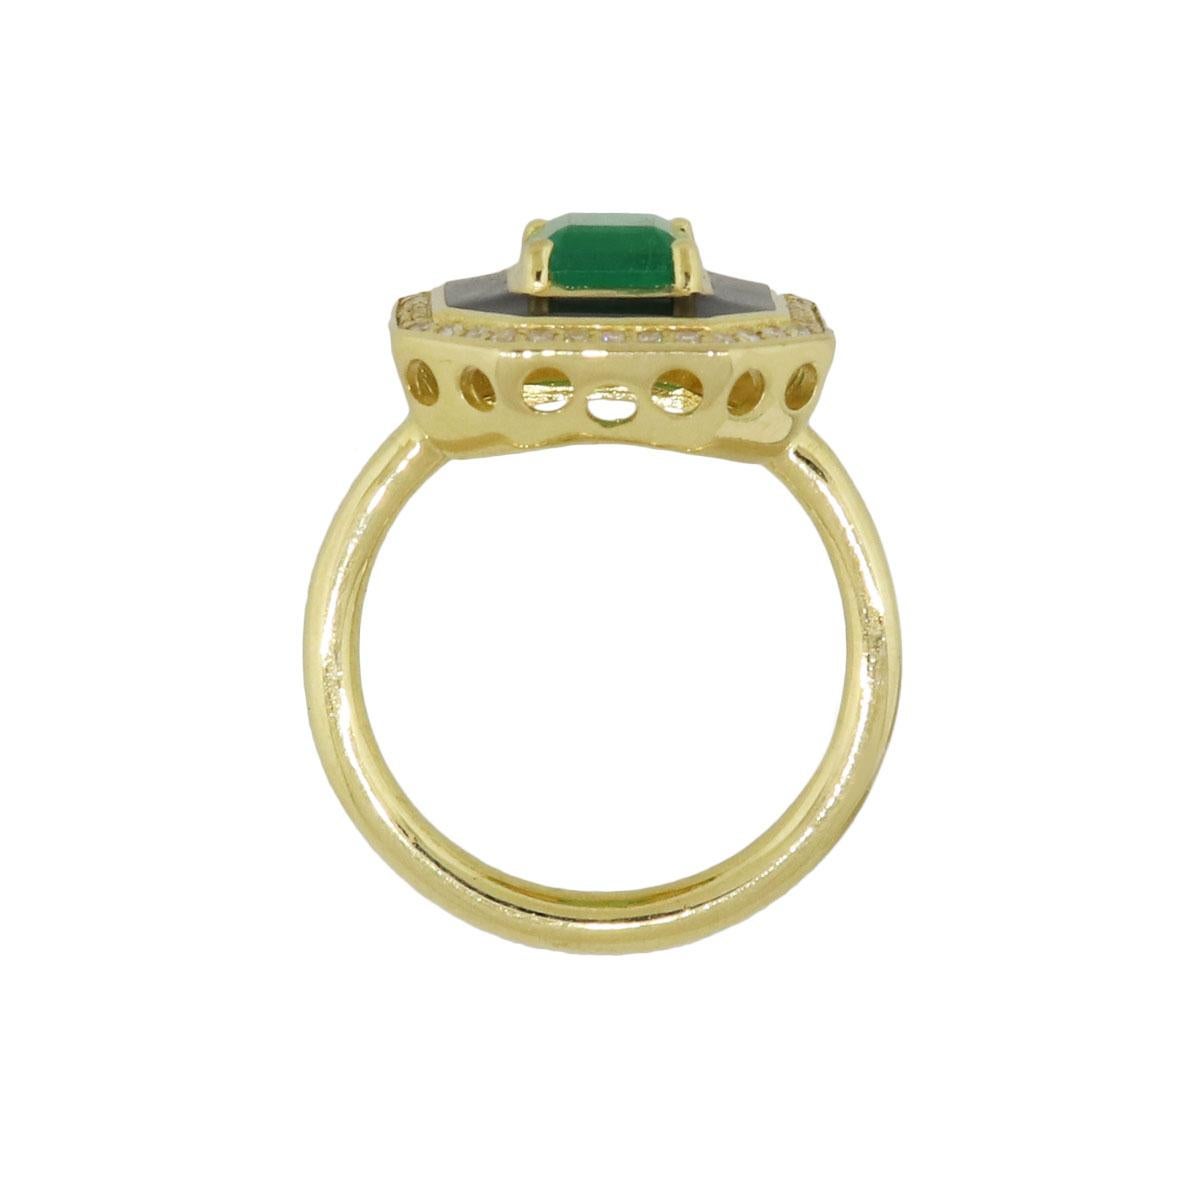 Material: 18k Yellow Gold
Diamond details: Approximately 0.15ctw of round brilliant diamonds. Diamonds are G/H in color and VS in clarity
Gemstone details: Emerald cut emerald approximately 1.75ct.
Measurements: 1.04″ x 0.71″ x 0.85″
Ring Size: 7